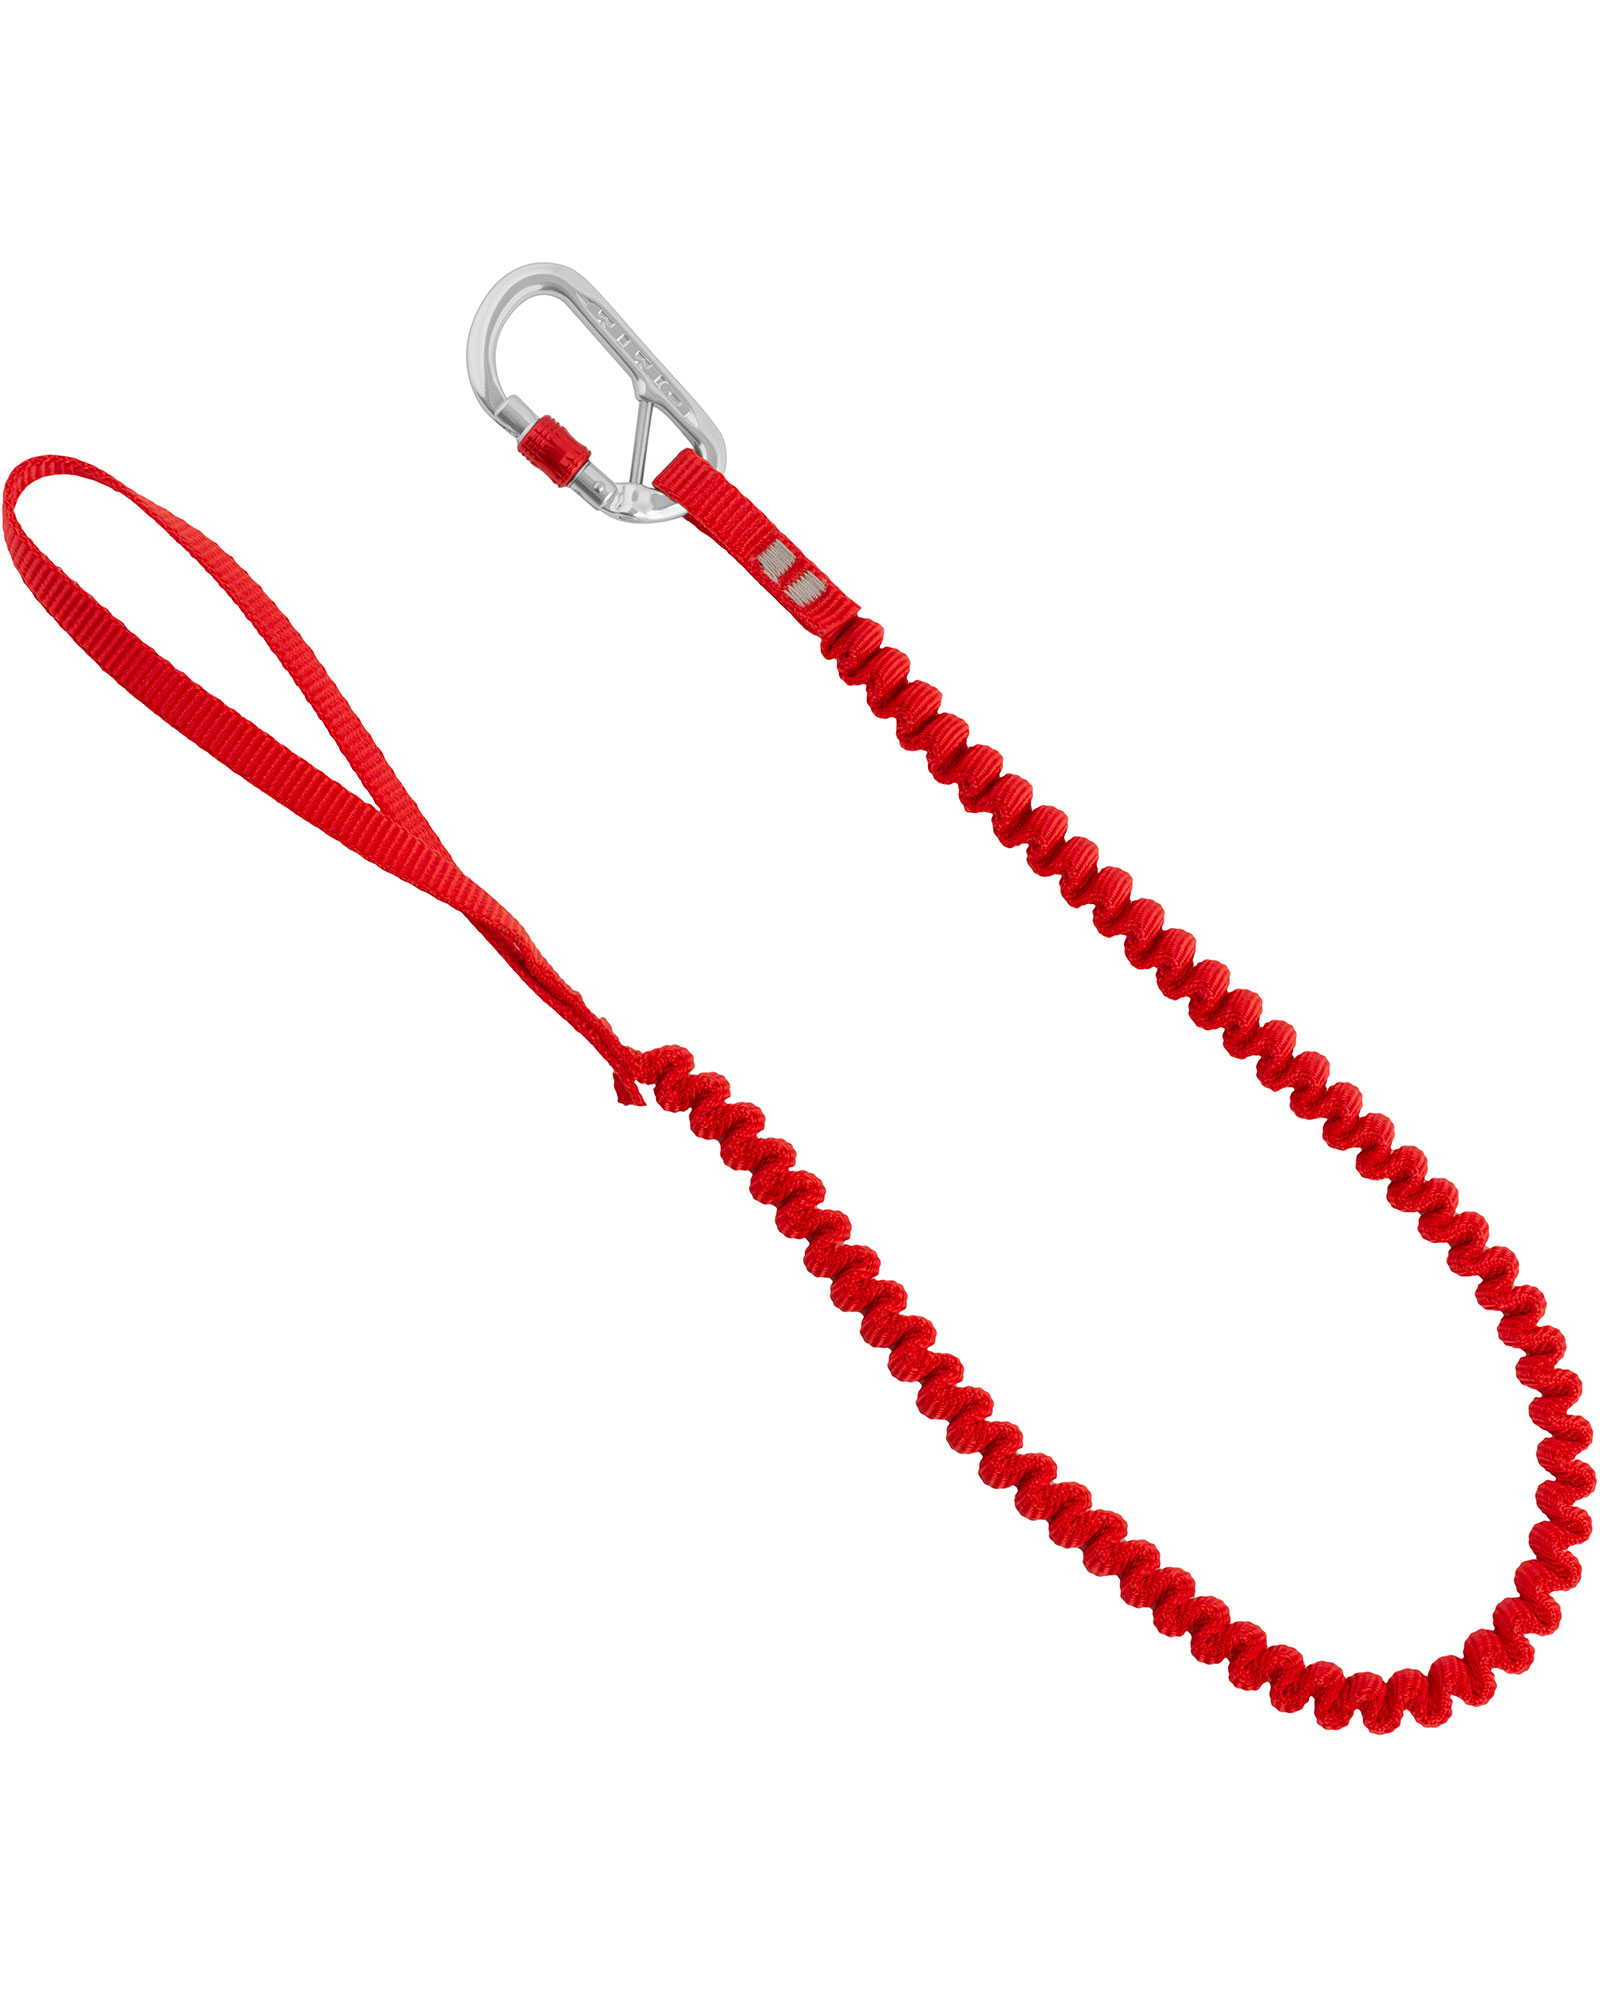 DMM Freedom Single XSRE Leash - Red